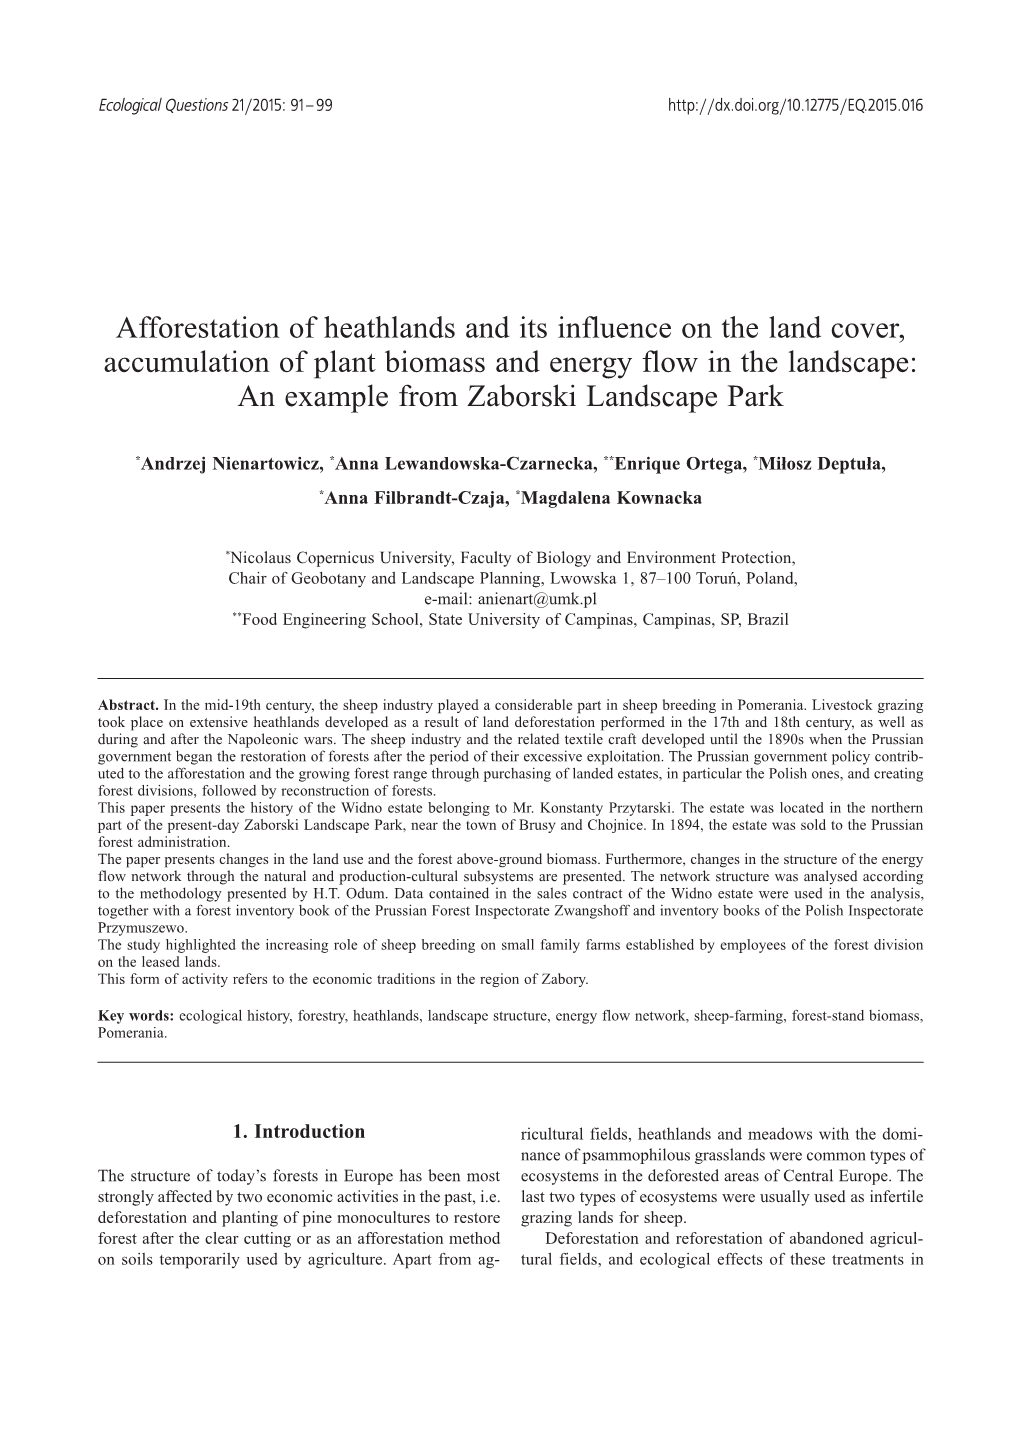 Afforestation of Heathlands and Its Influence On